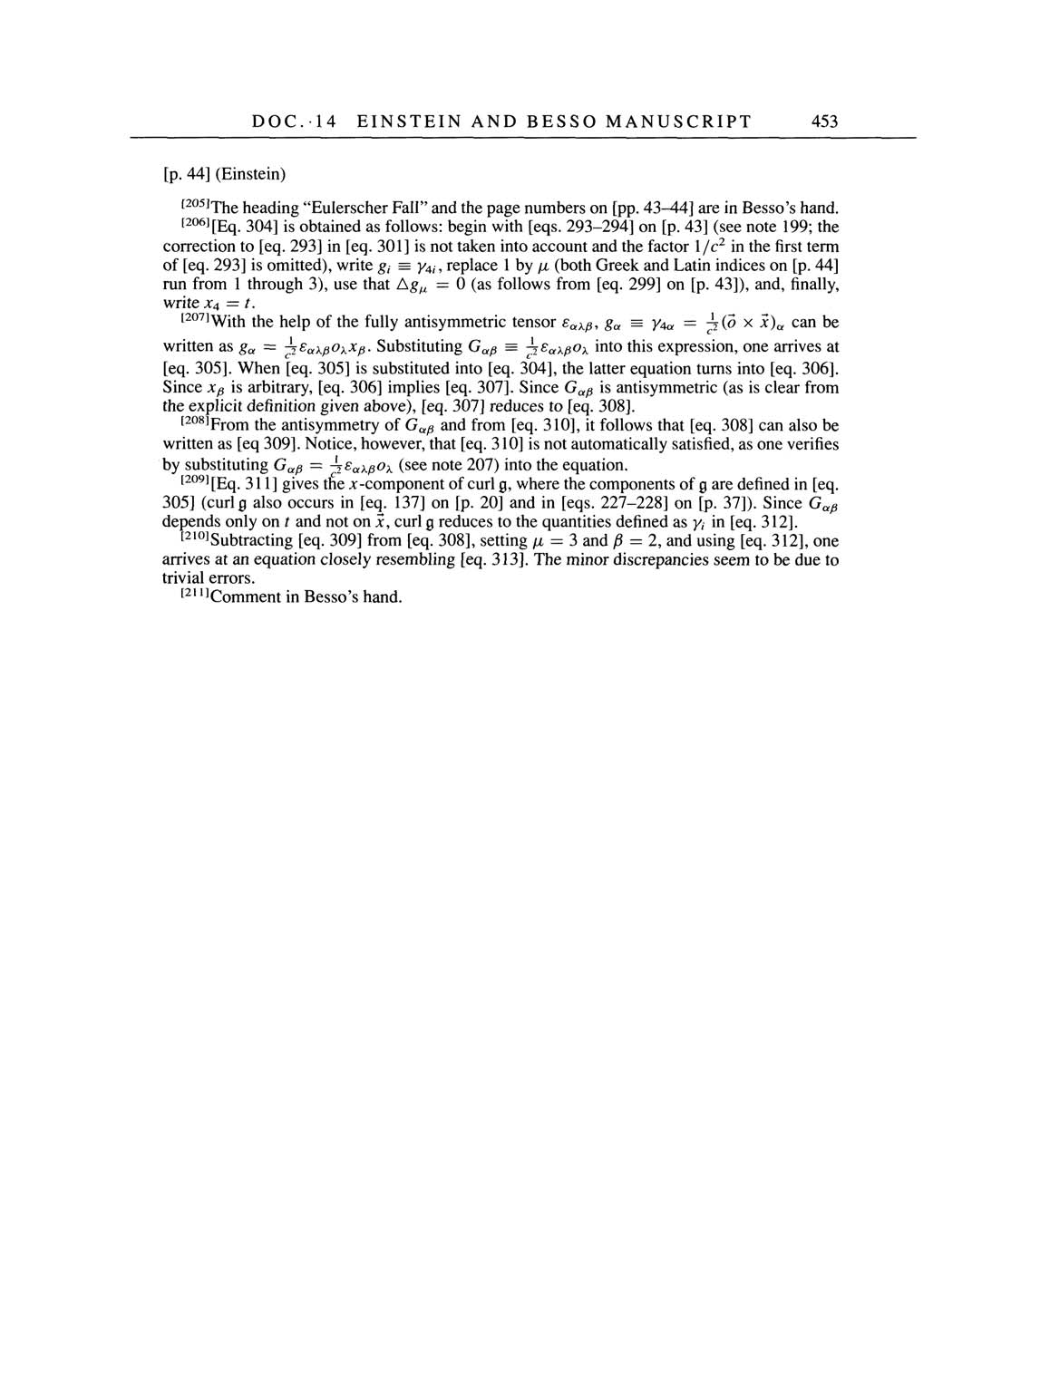 Volume 4: The Swiss Years: Writings 1912-1914 page 453